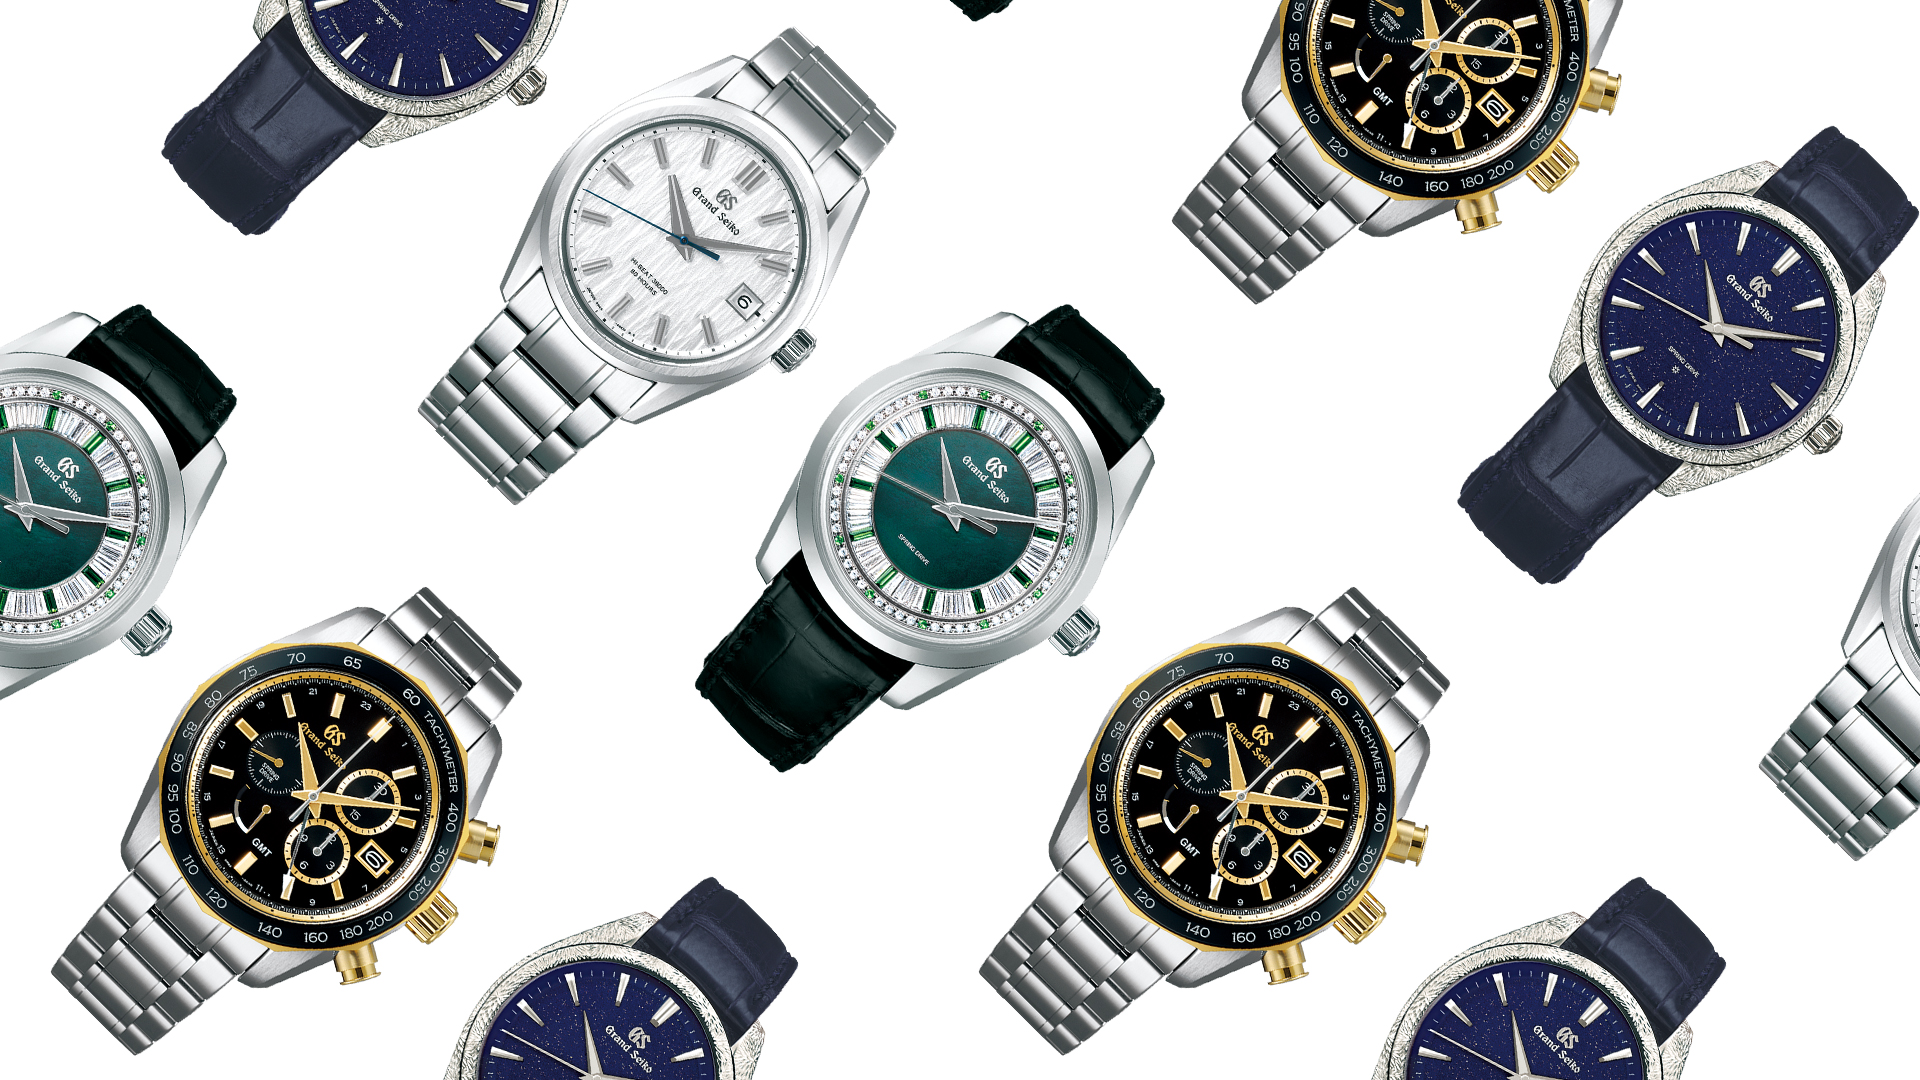 Four Watches You Need On Your Wrist in 2022